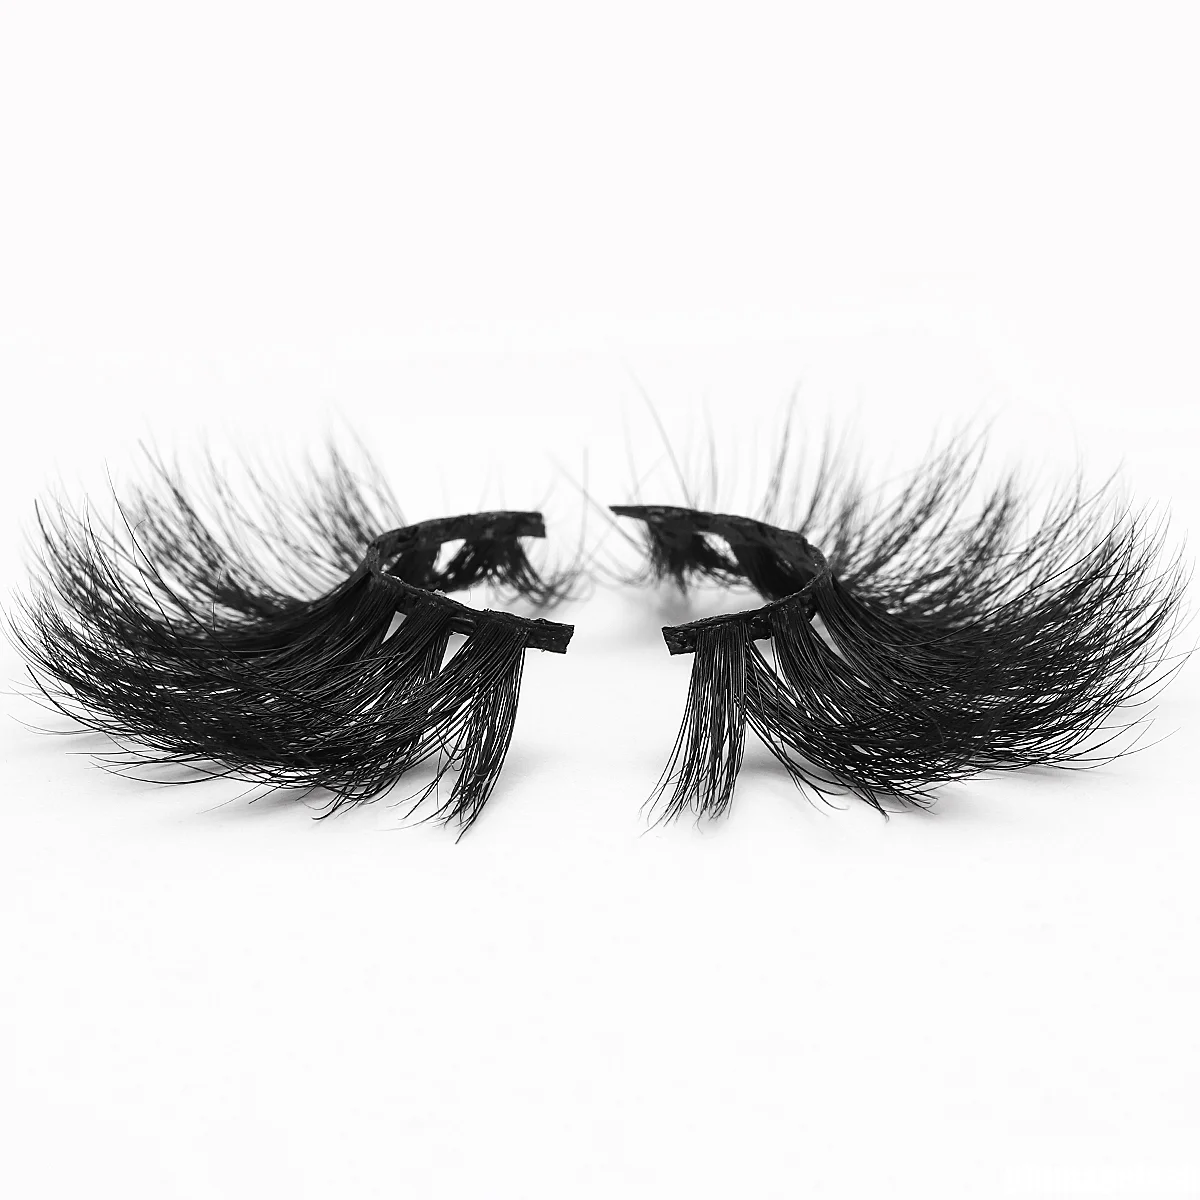 5D mink lashes are made of real mink fur